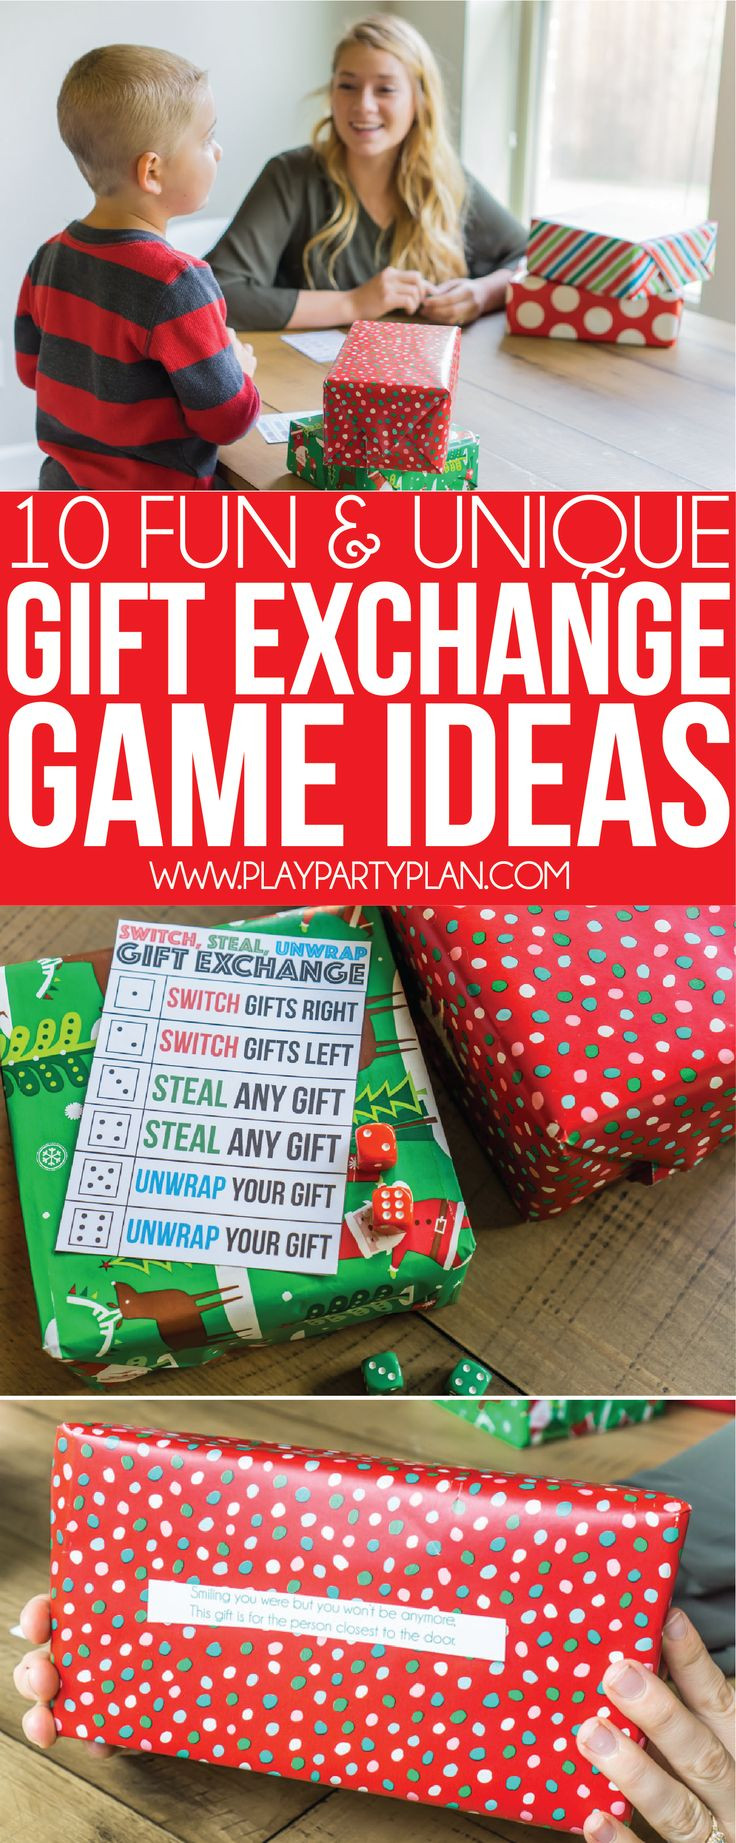 Office Christmas Party Gift Exchange Ideas
 25 unique fice christmas ts ideas on Pinterest